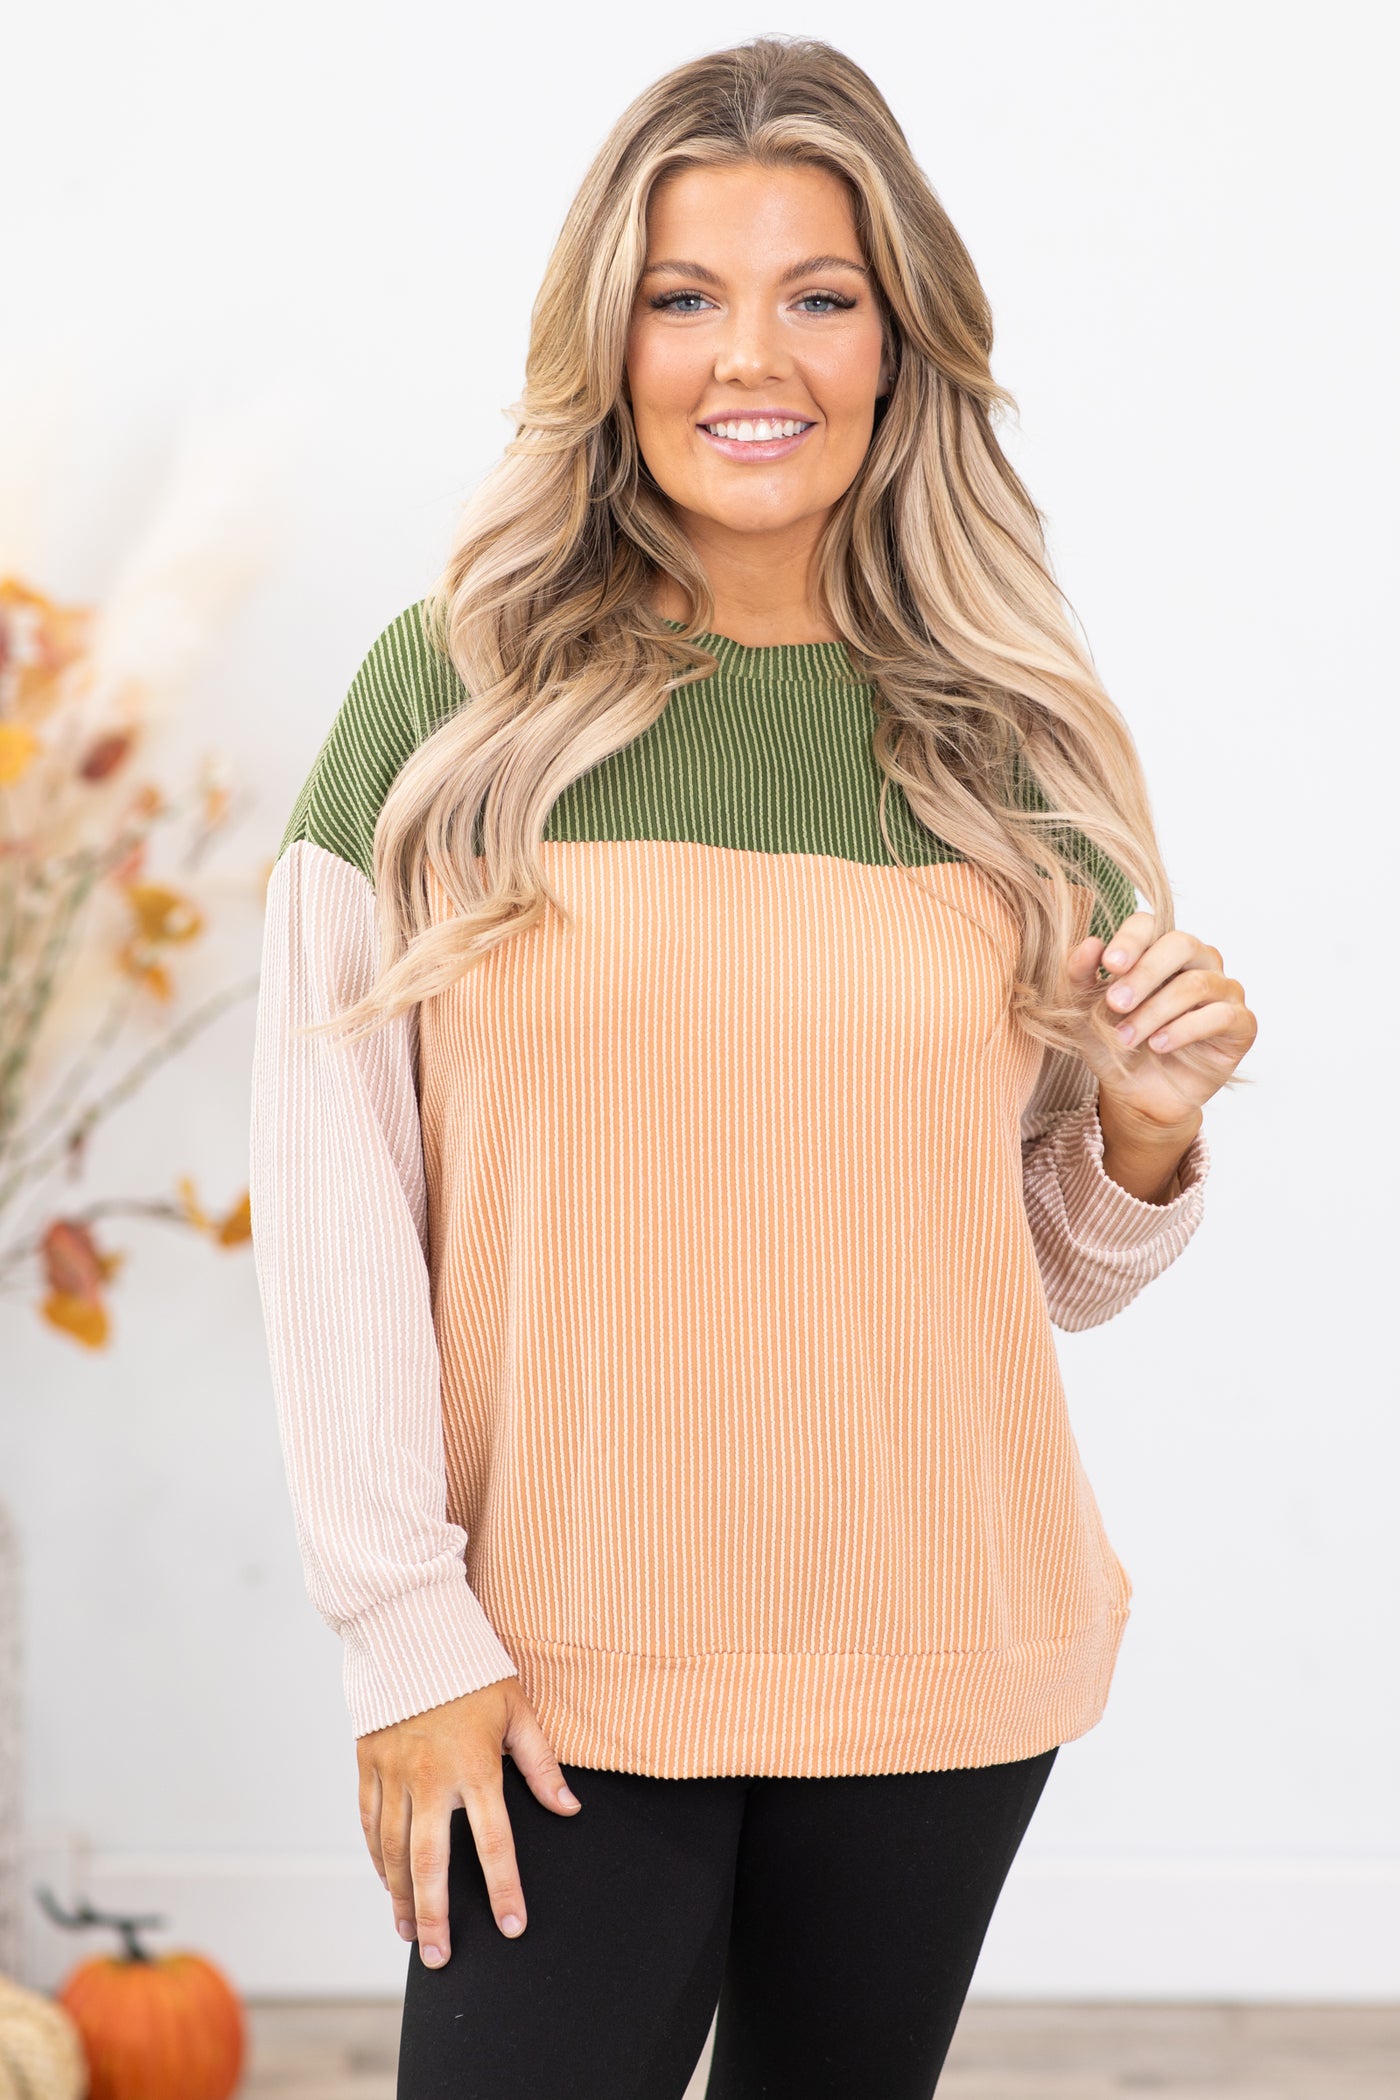 Olive and Tan Colorblock Top